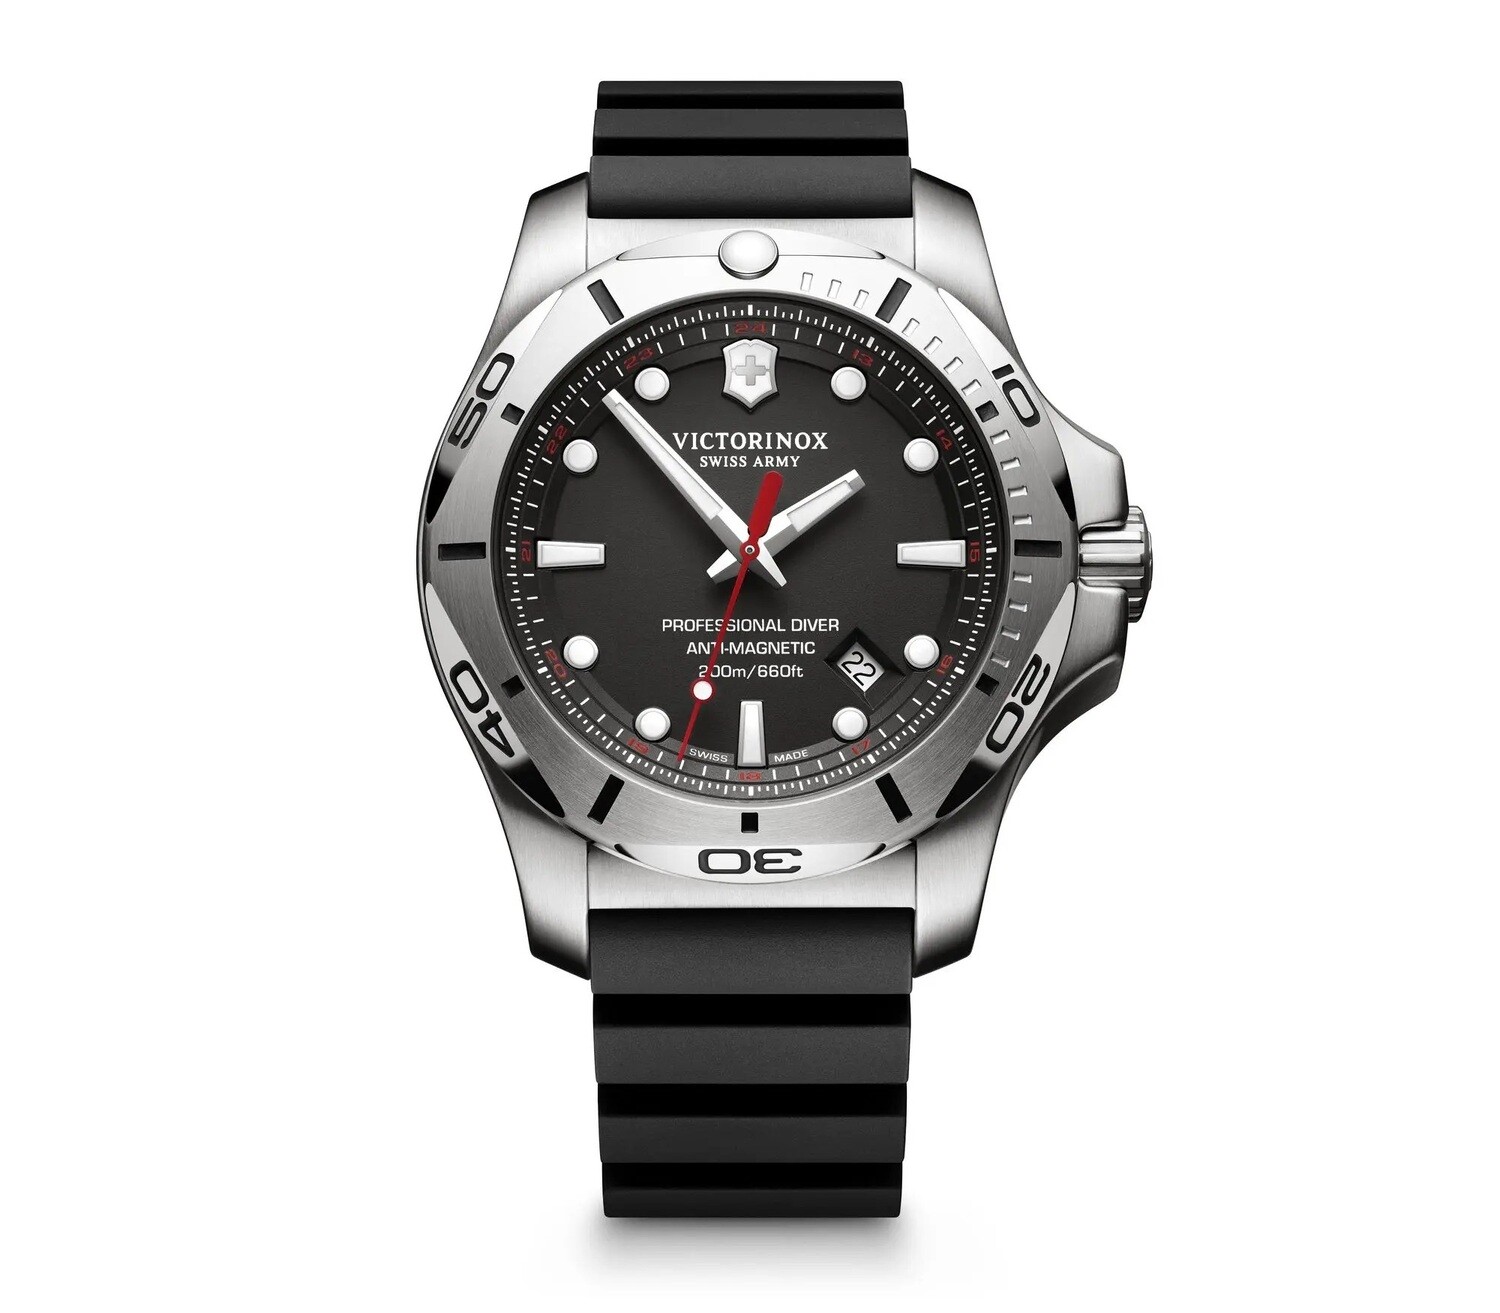 Victorinox Swiss Army I.N.O.X. Professional Diver 241733.1 45mm  sapphire crystal 200m WR rubber band divers men’s watch